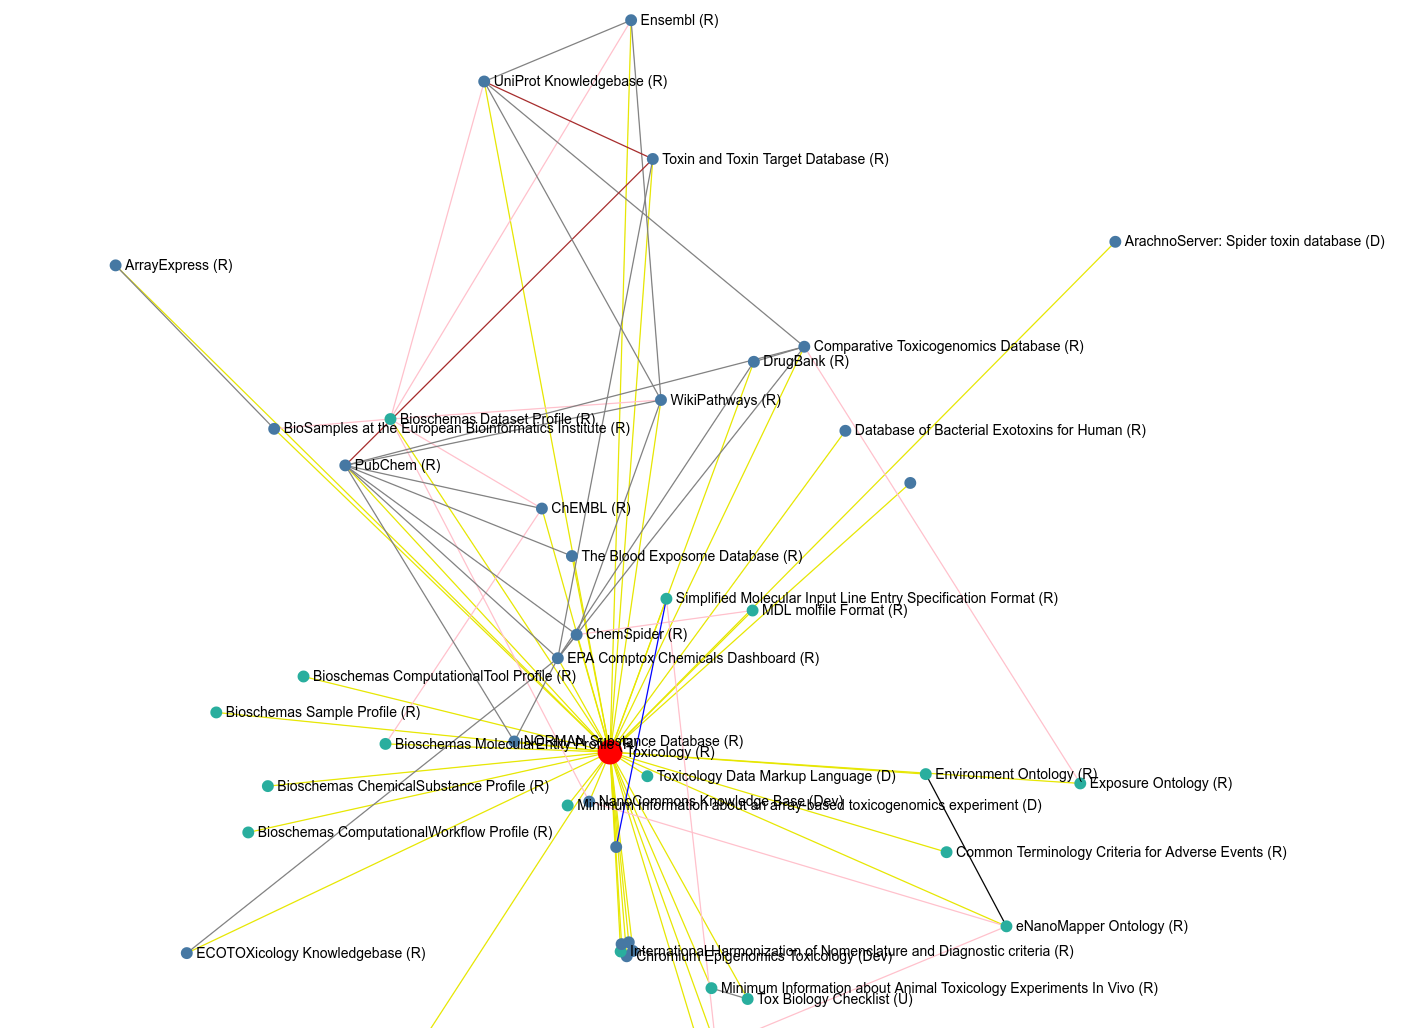 Screenshot of the 'collects' graph of the FAIRsharing Toxicology Community.